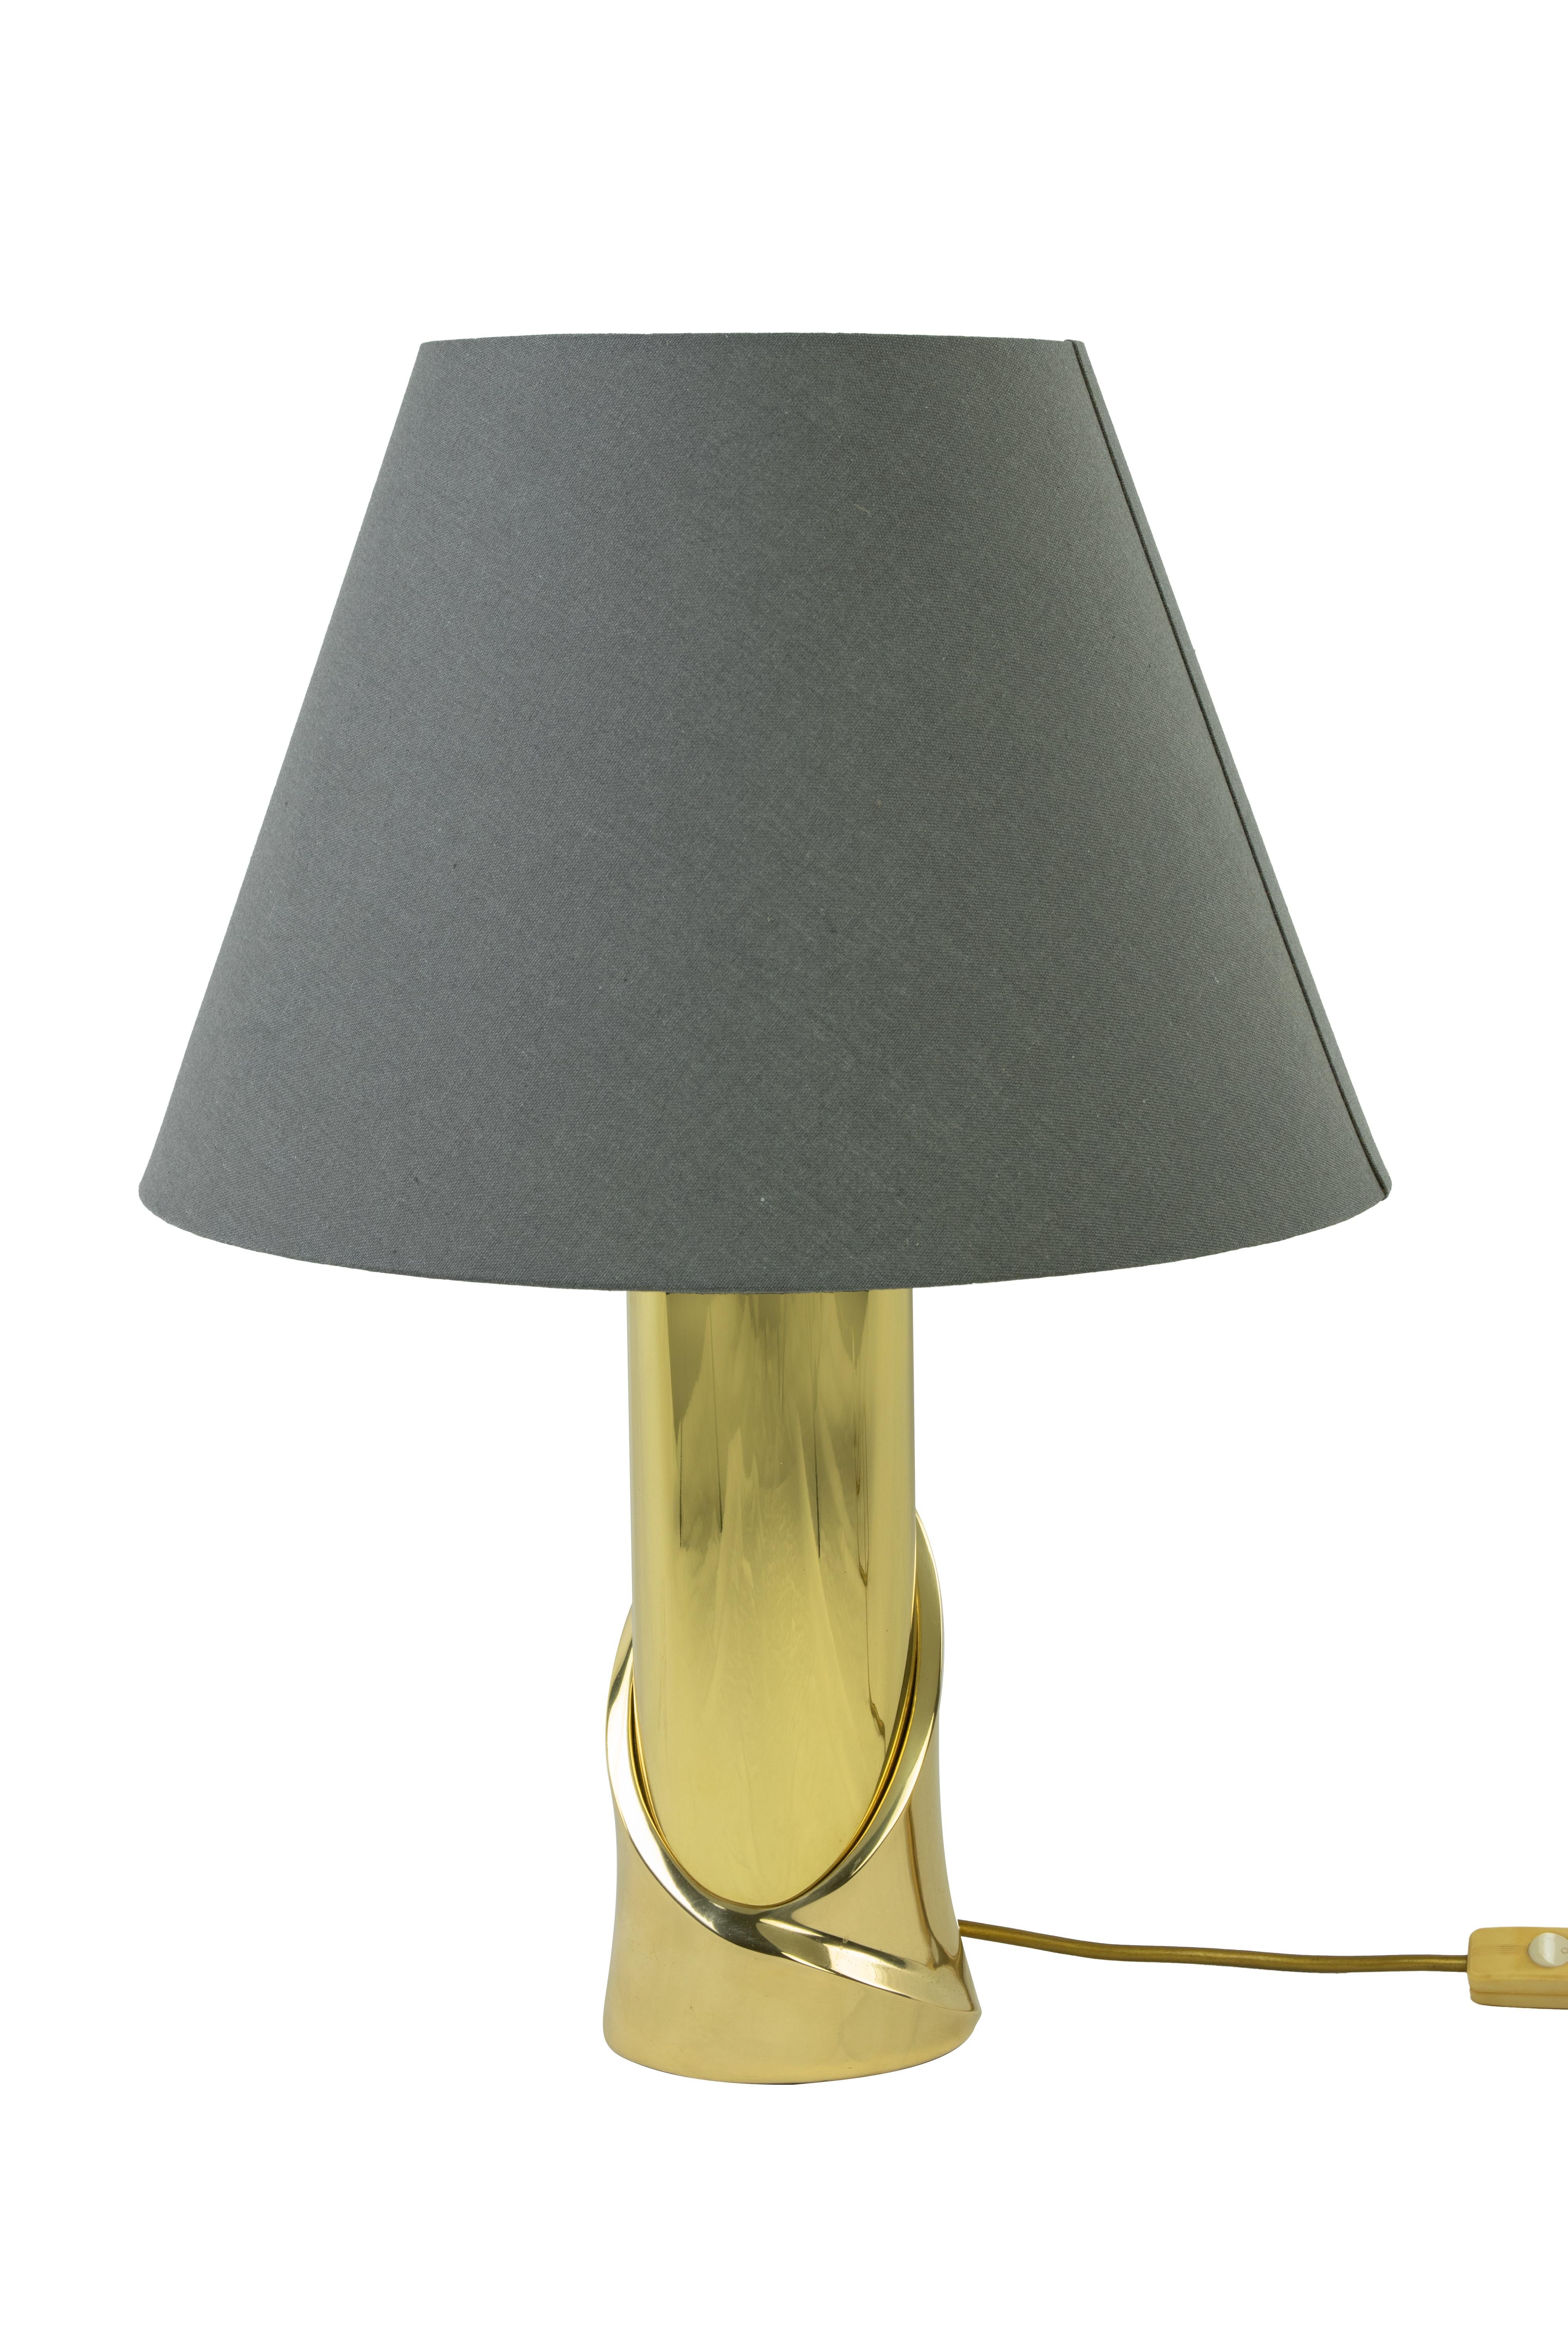 Table Lamp by Luciano Frigerio, Prod. Frigerio di Desio,1970s.

Brass and Fabric, Includes Lampshade.

Dimensions cm 59x39.

Very good condition. Small lines, light scratches, normal signs of wear.    